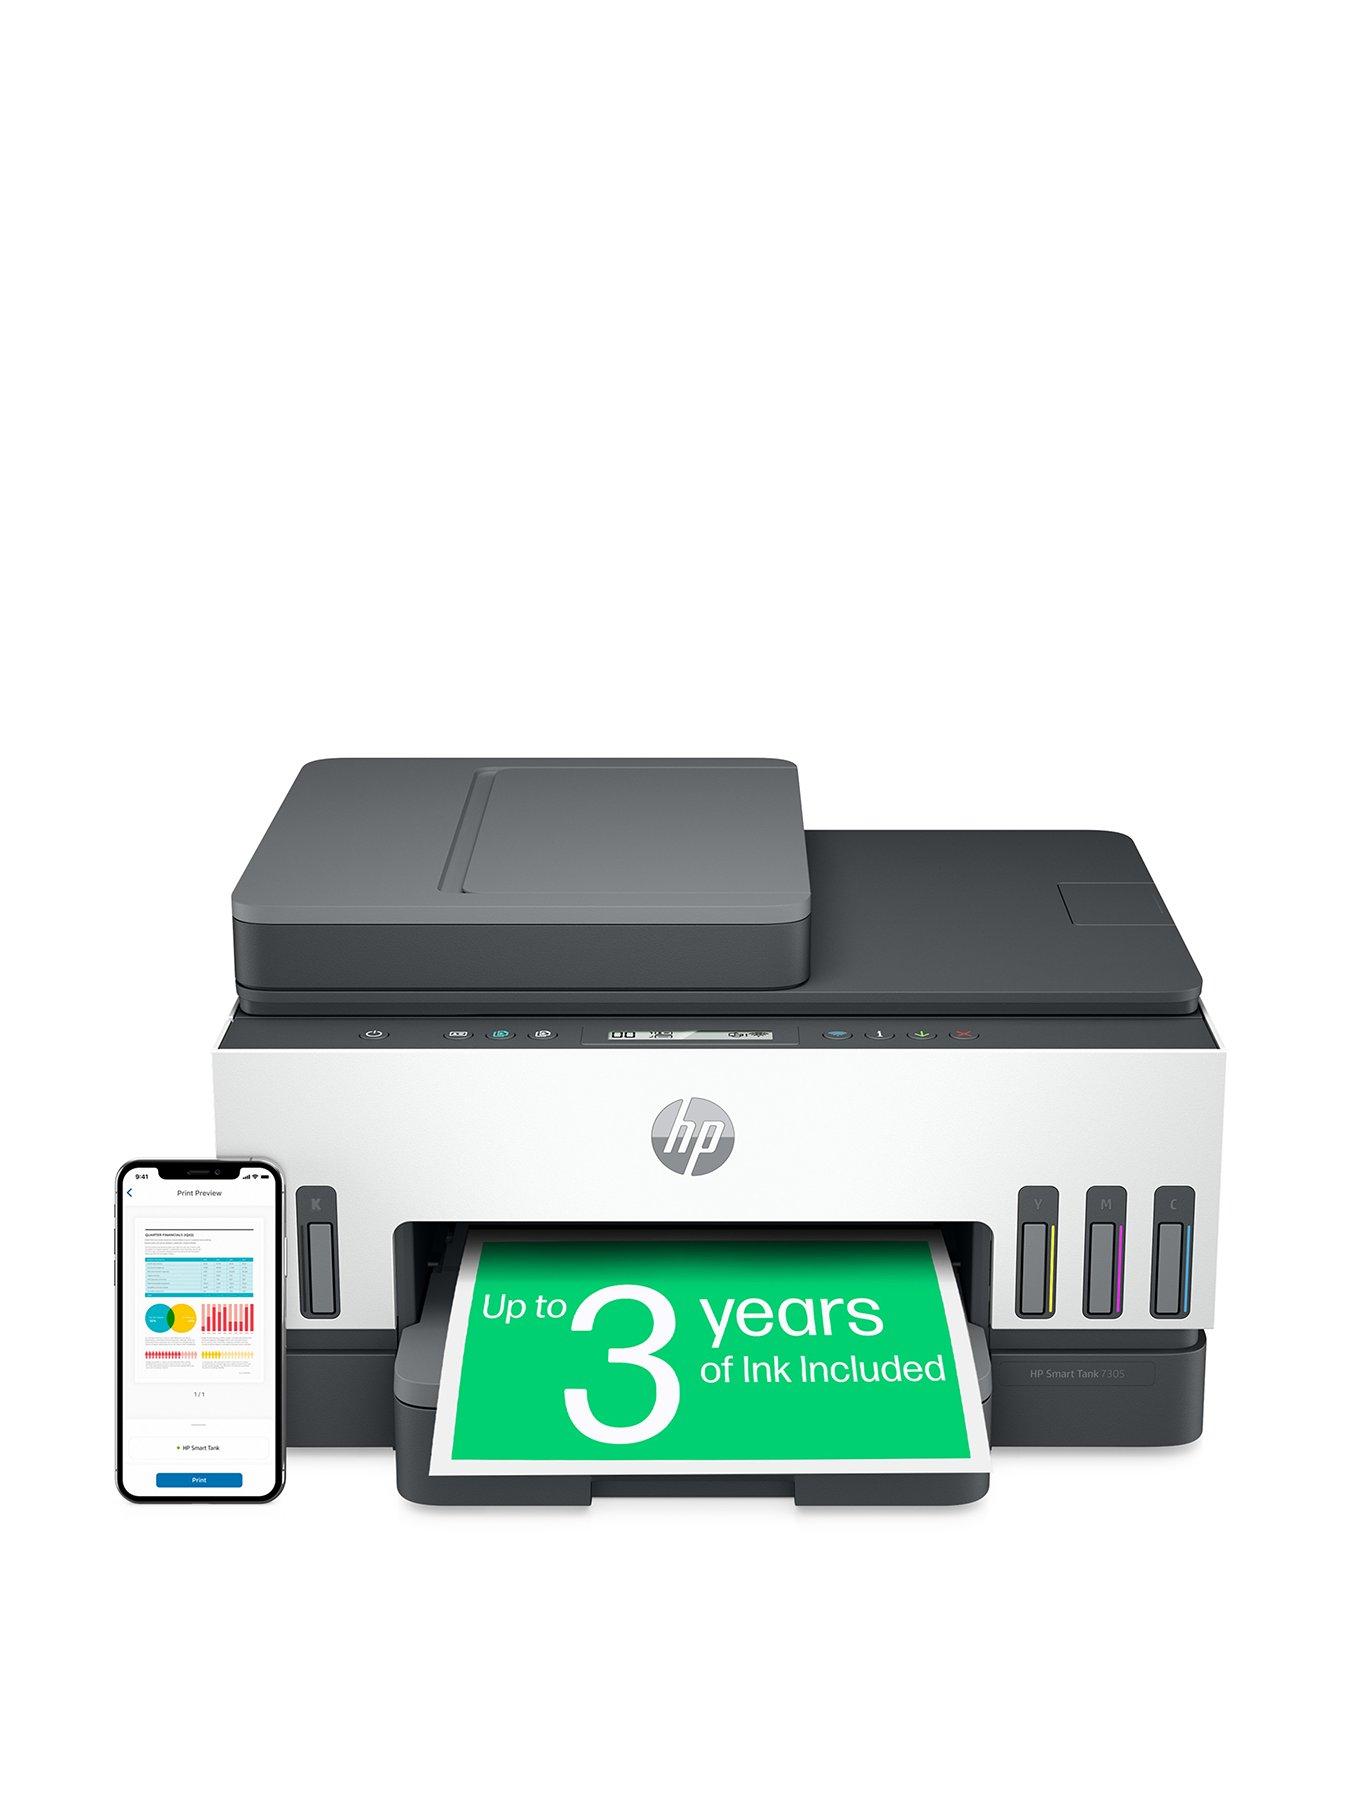 Hp Smart Tank 7305 Wireless All-In-One Colour Printer With Up To 3 Years Of Hp Ink Bottles Included